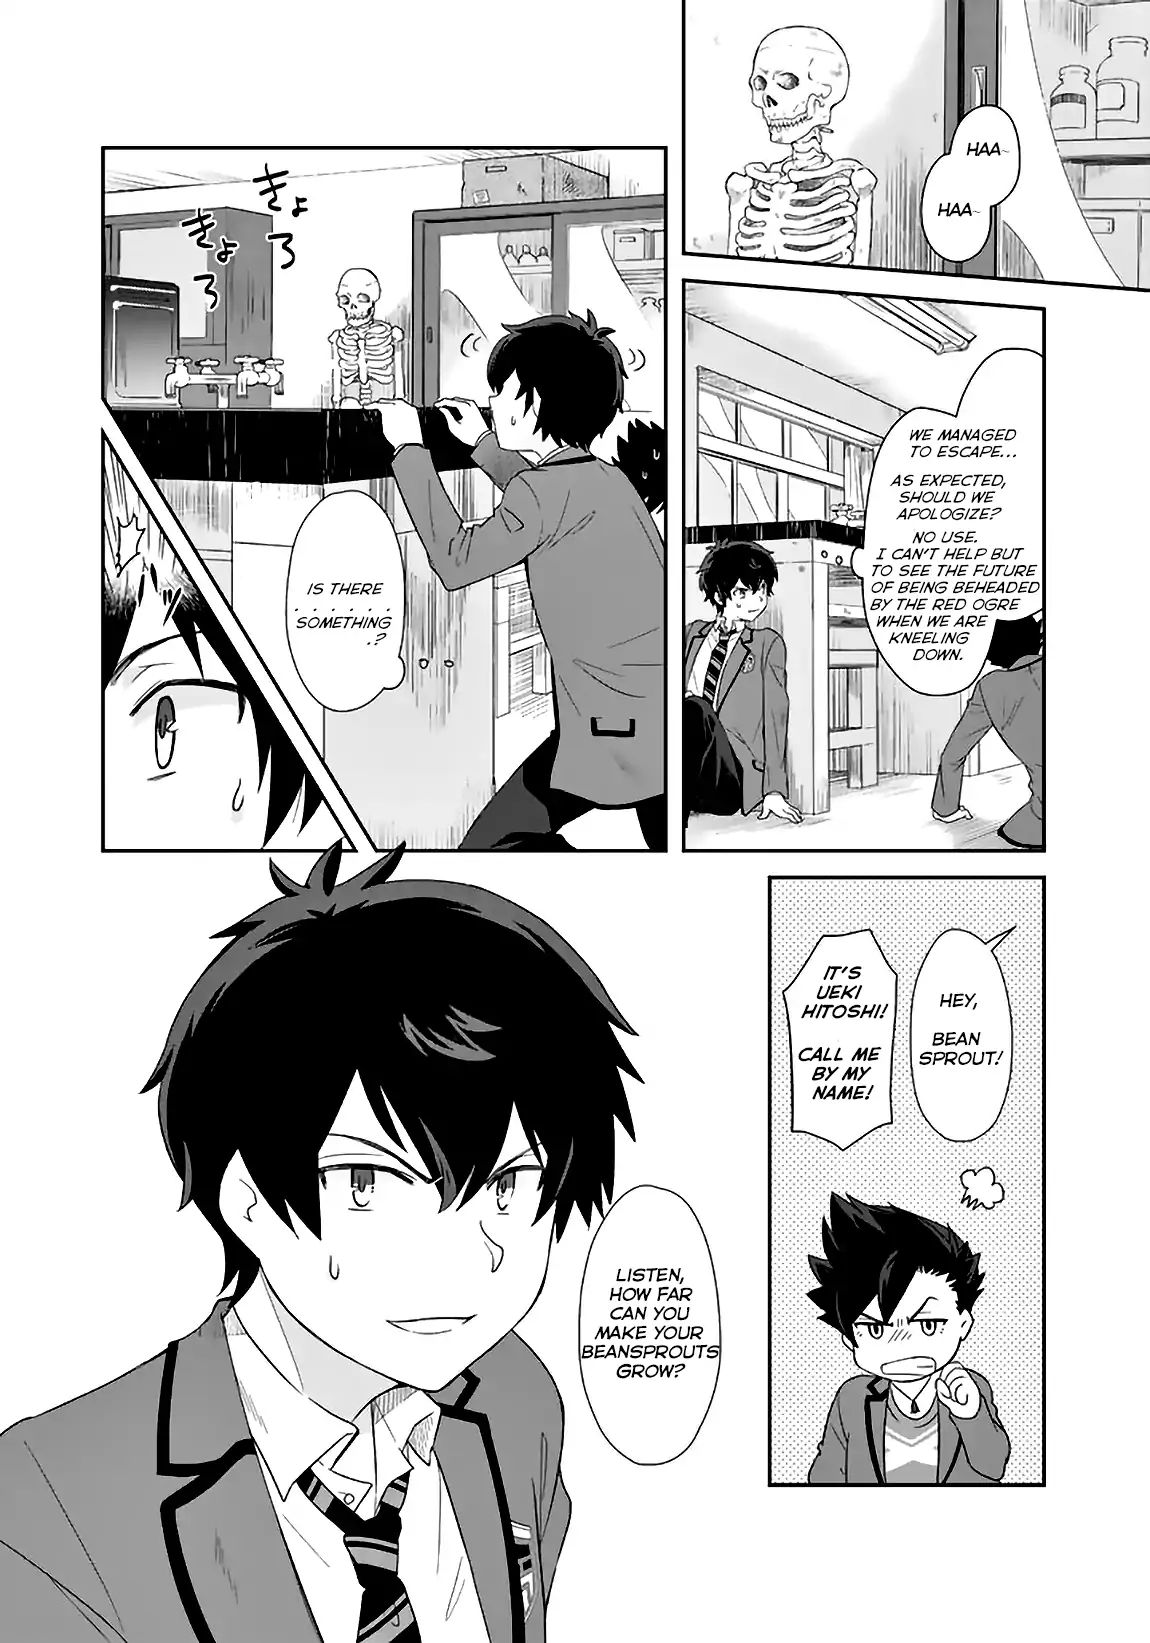 I, Who Possessed A Trash Skill 【Thermal Operator】, Became Unrivaled. Chapter 2 #12